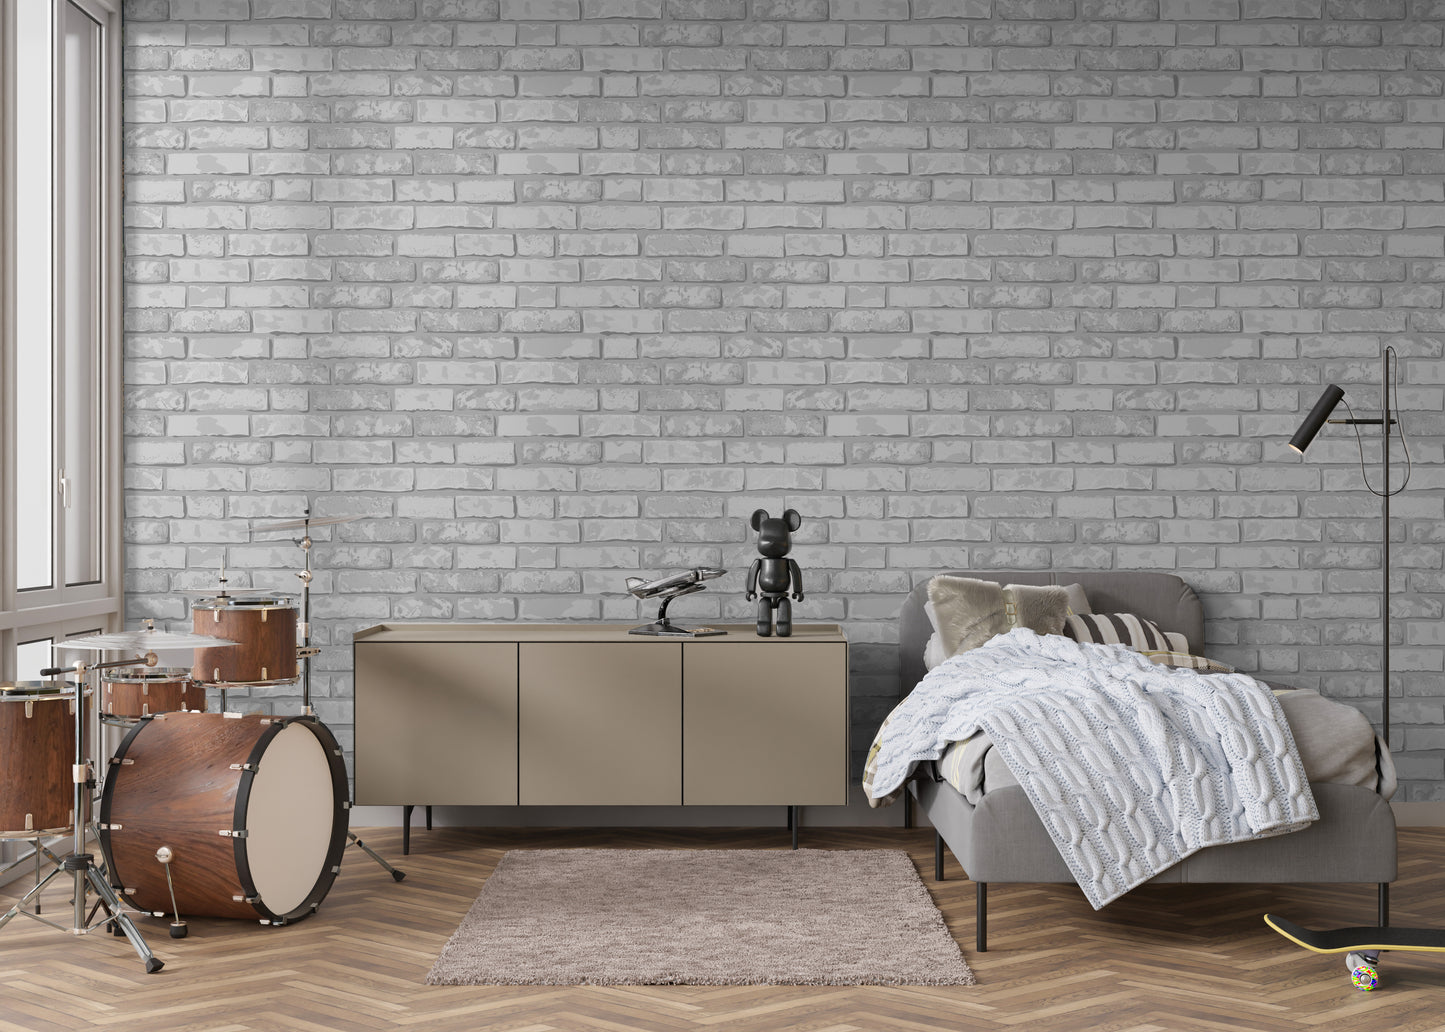 Whitewashed Brick Removable Peel And Stick Wallpaper